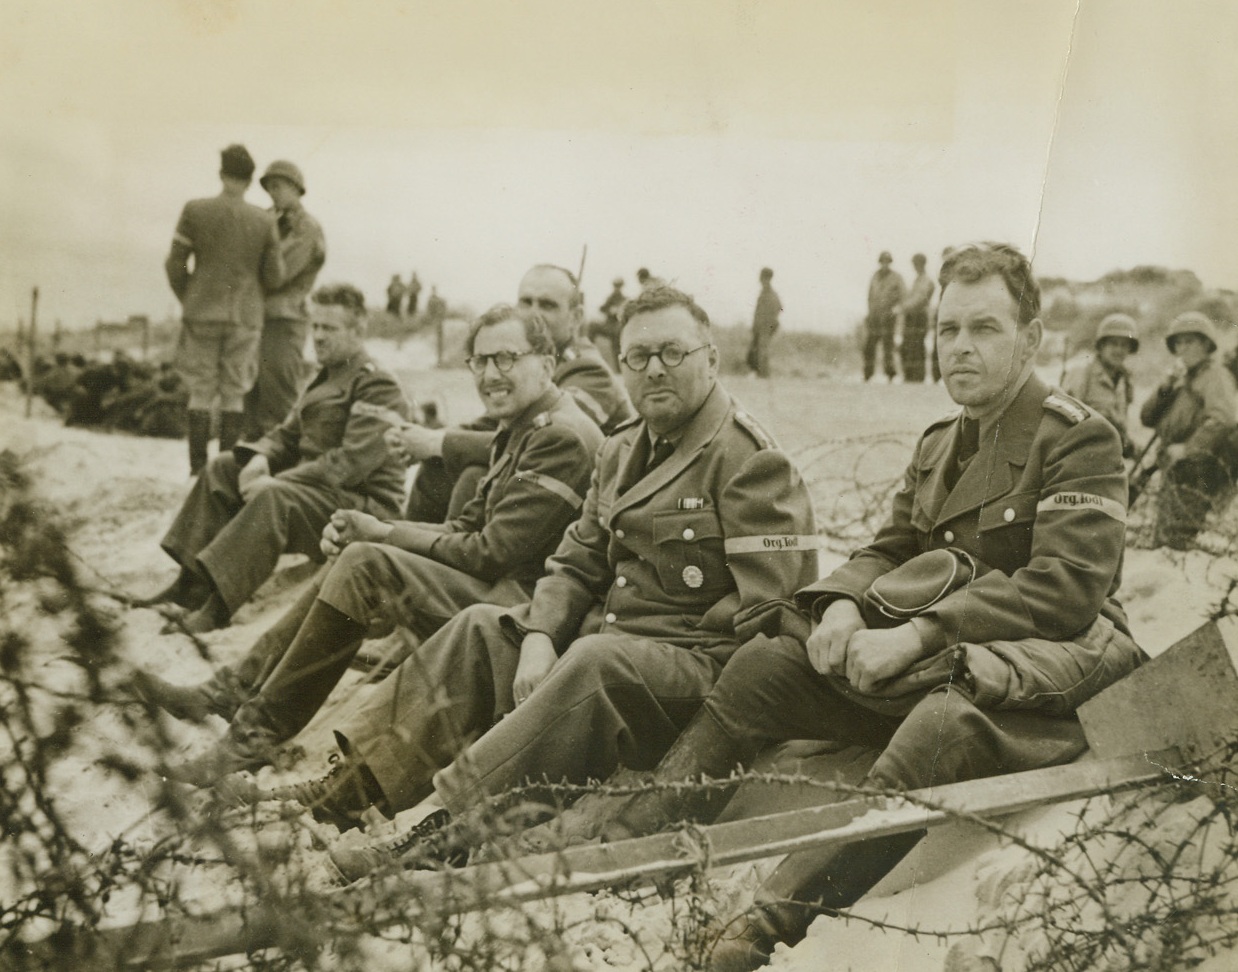 They Built the Impregnable Wall, 7/3/1944. NORMANDY, FRANCE - From behind their barbed wire cage, these officers of the German ...Organization Labor Battallion watch with interest (and is there a trace of disdain?) the Yanks who were partially responsible for the downfall of the Atlantic Wall and the Siegfried Line which the...Organization built. Taken prisoner when the allies invaded the French Coast and blasted the famed wall into nothingness, these master minds of engineering will go into hibernation for the duration.;